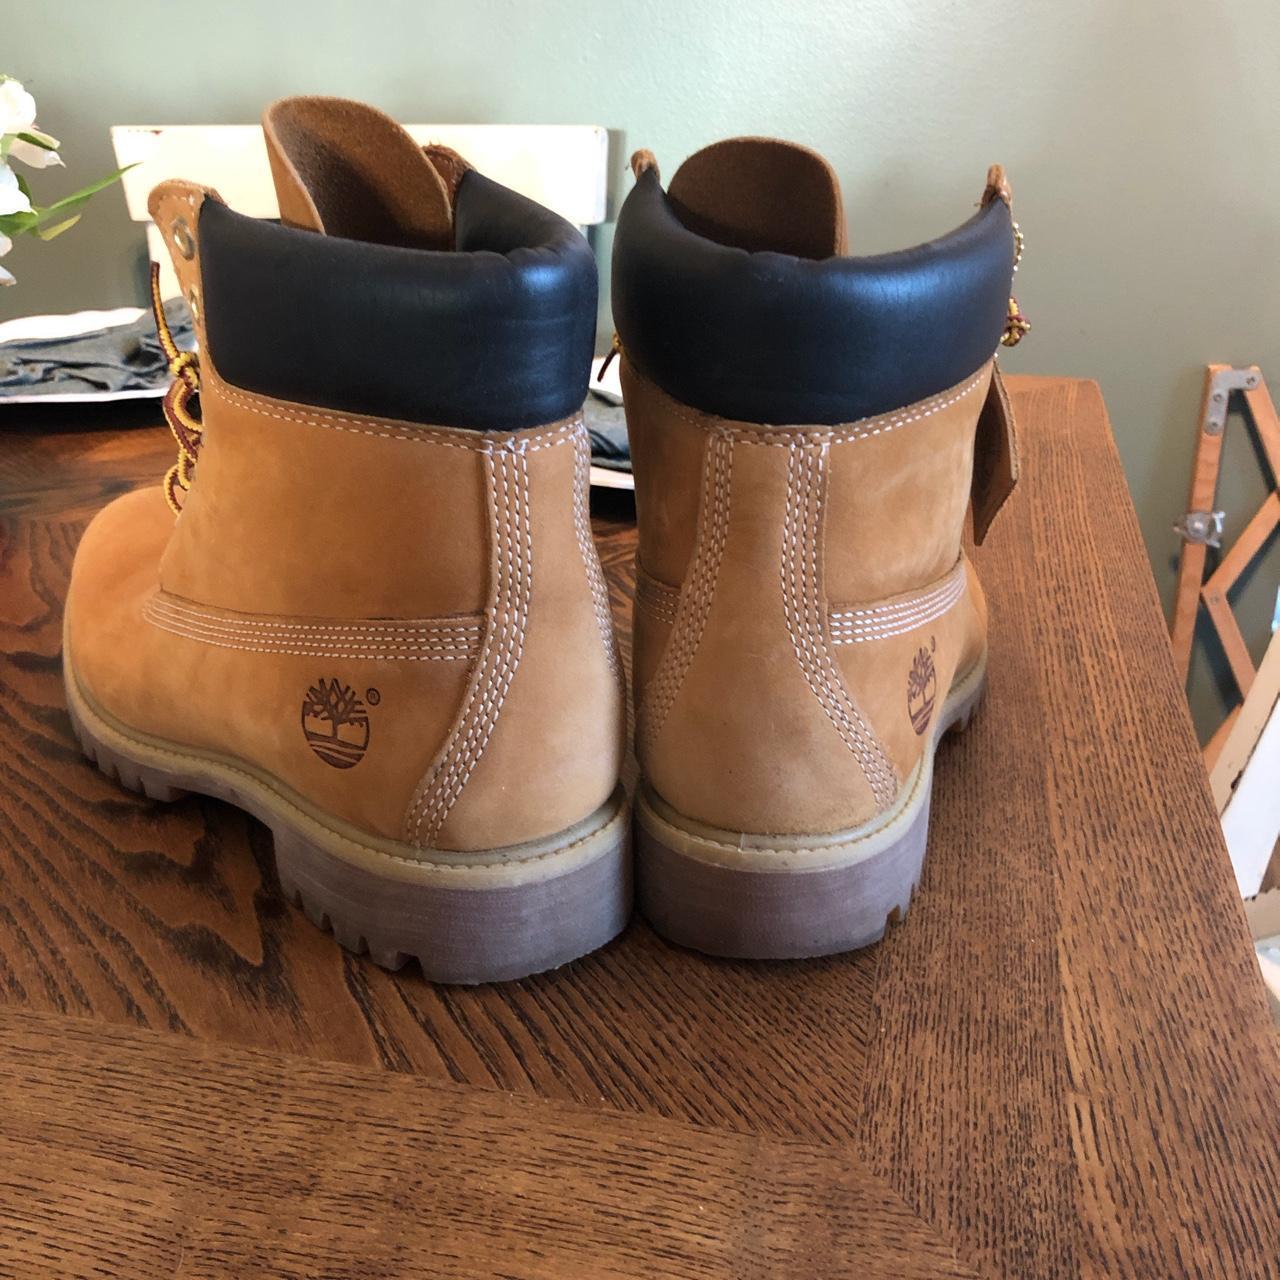 Timberland Men's Tan and Black Boots (3)